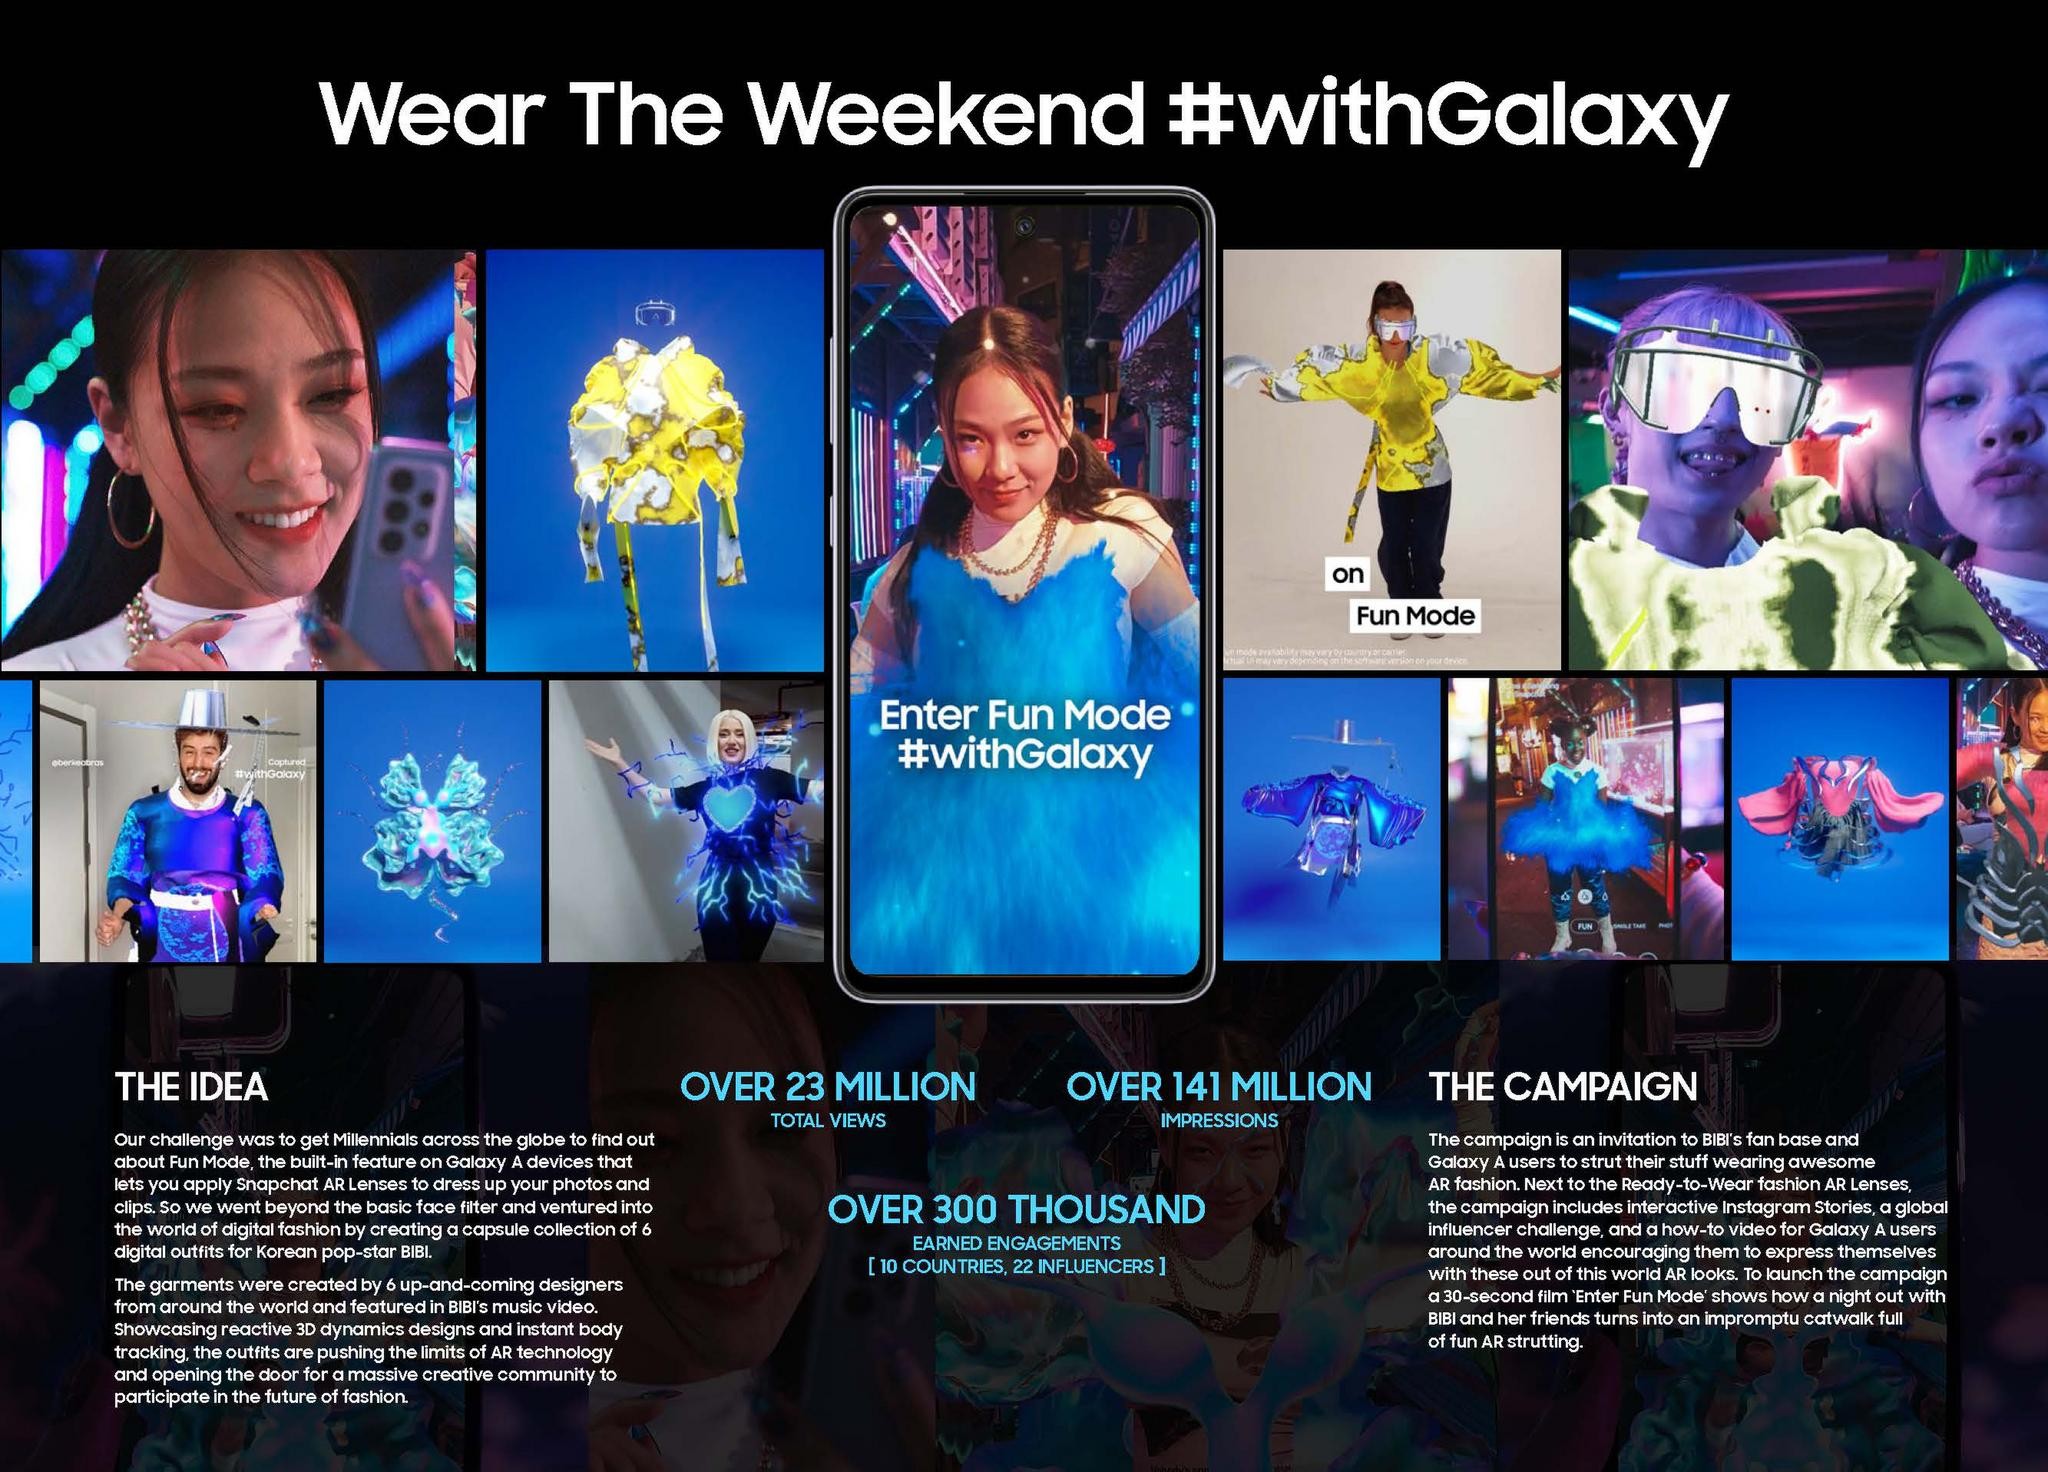 Wear the Weekend #withGalaxy